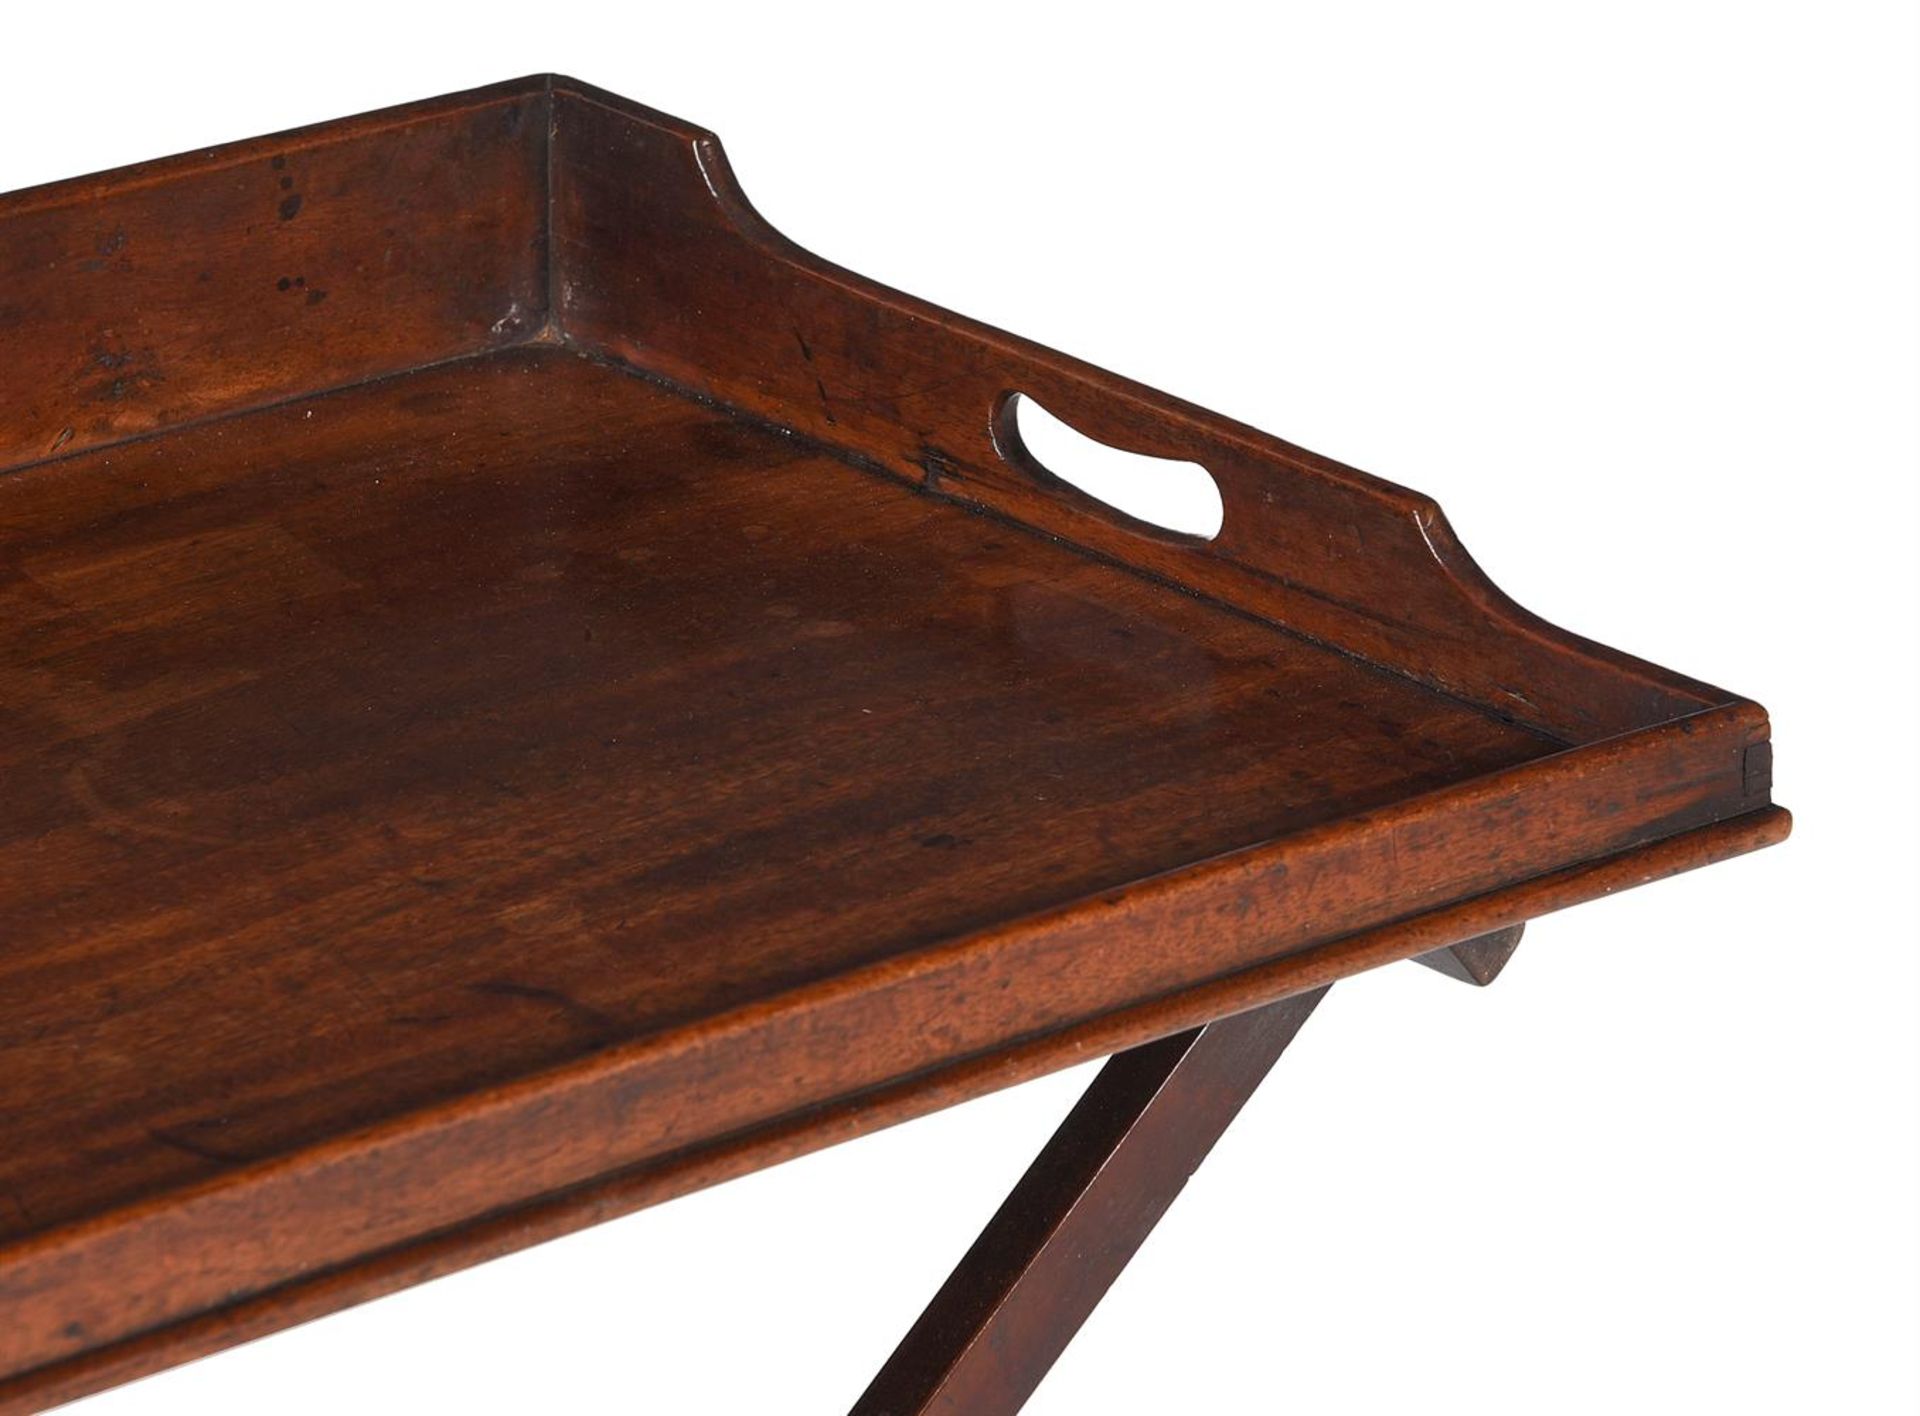 A MAHOGANY BUTLERS TRAY ON STAND, LATE 18TH OR EARLY 19TH CENTURY - Image 3 of 3